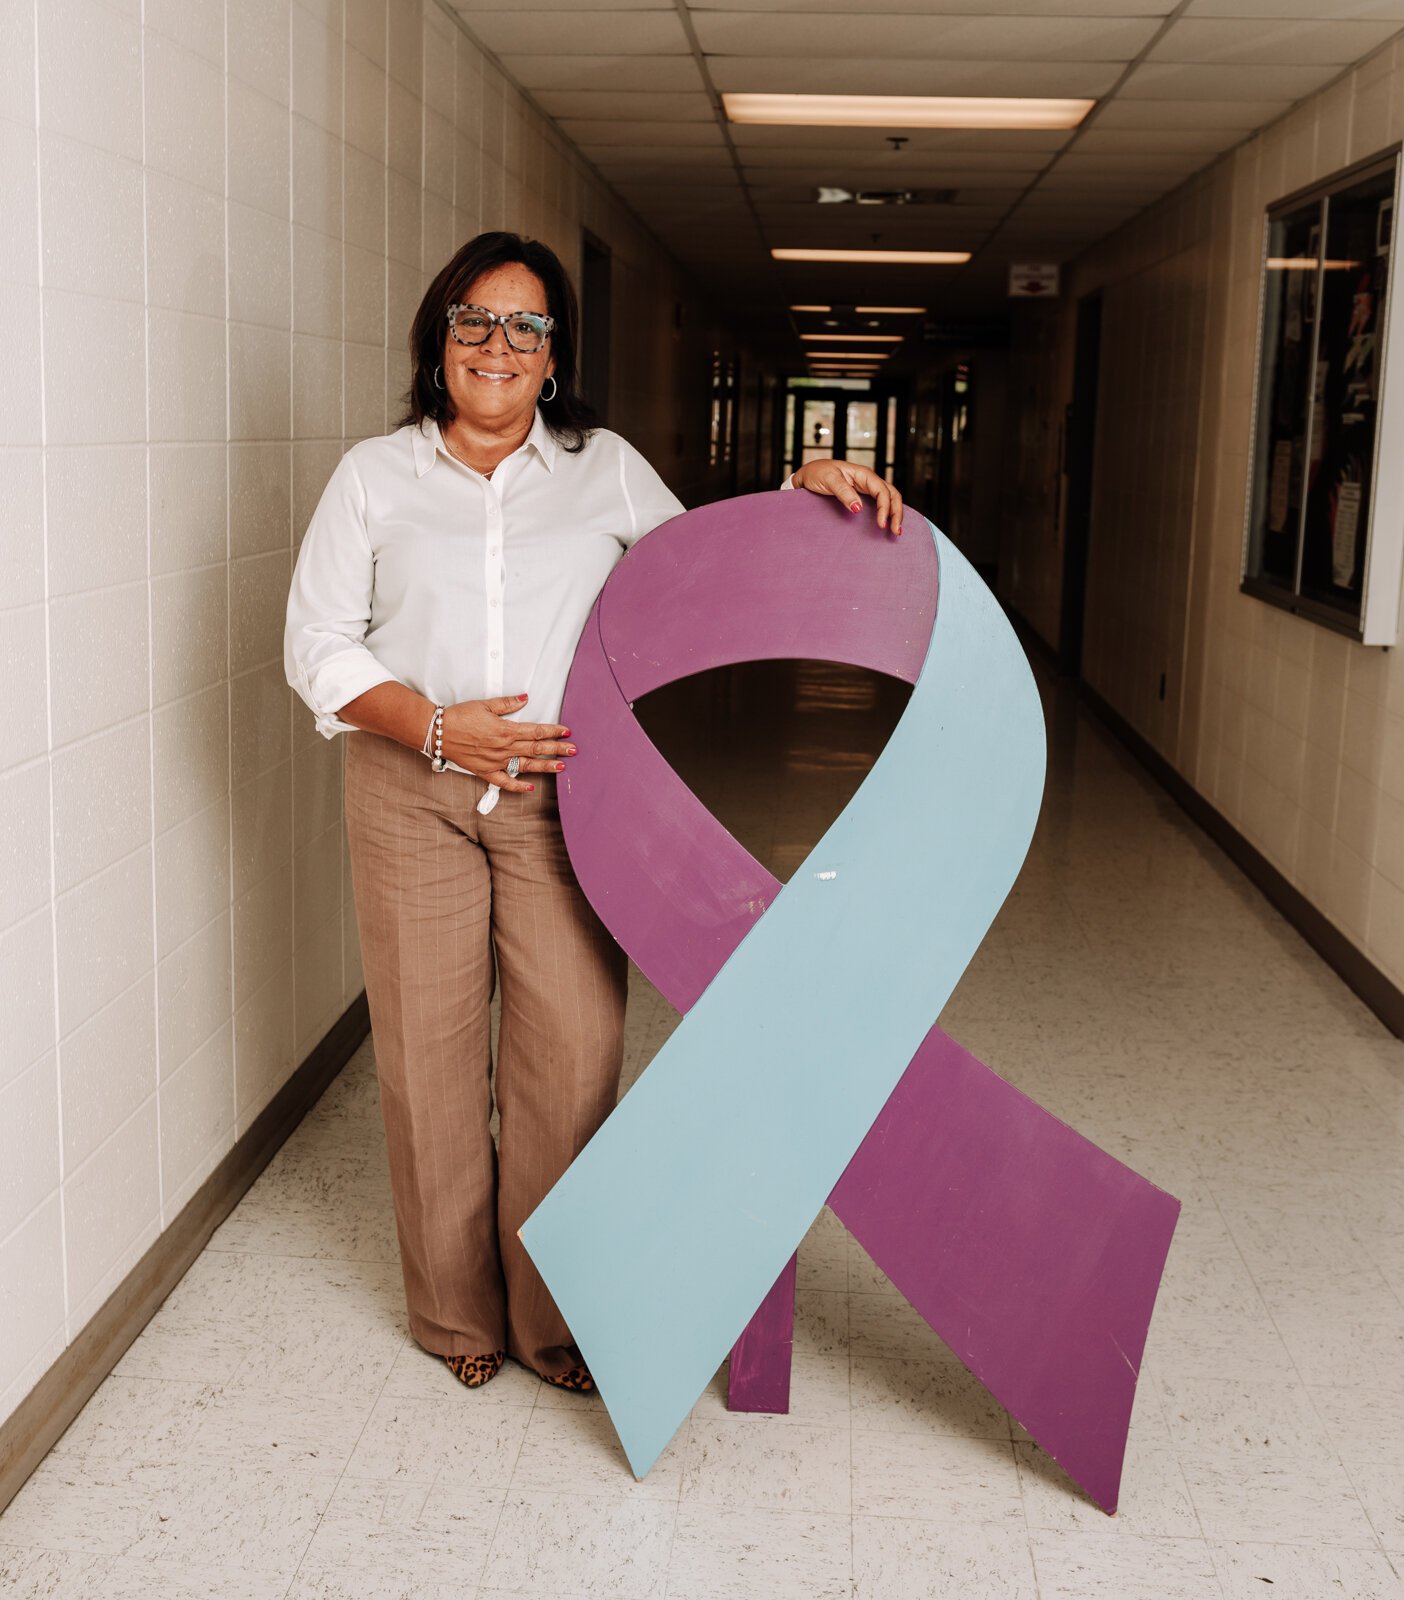 Portrait of Alice Jordan-Miles, Director of Bien Estar Sin Fronteras (Wellness Without Borders) next to the suicide prevention ribbon at Purdue Fort Wayne.